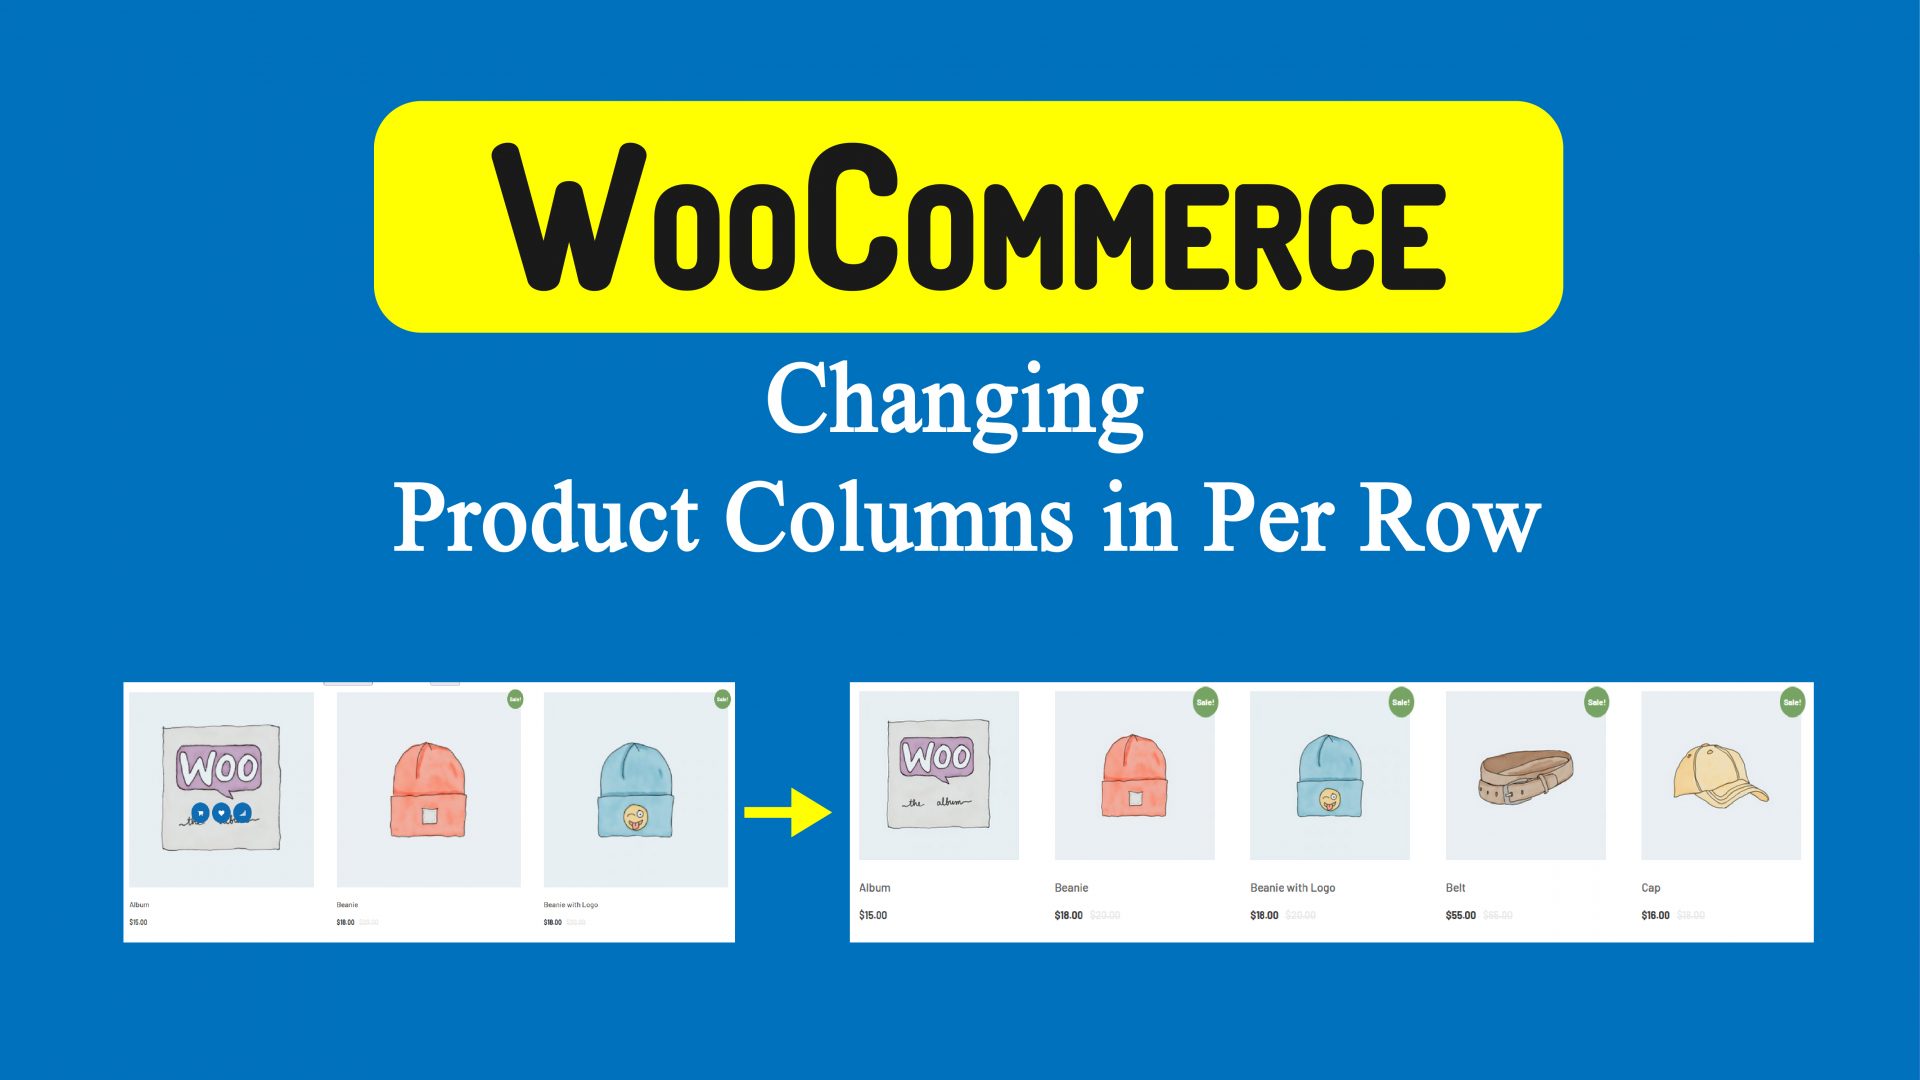 How To Change WooCommerce Product Columns in Per Row